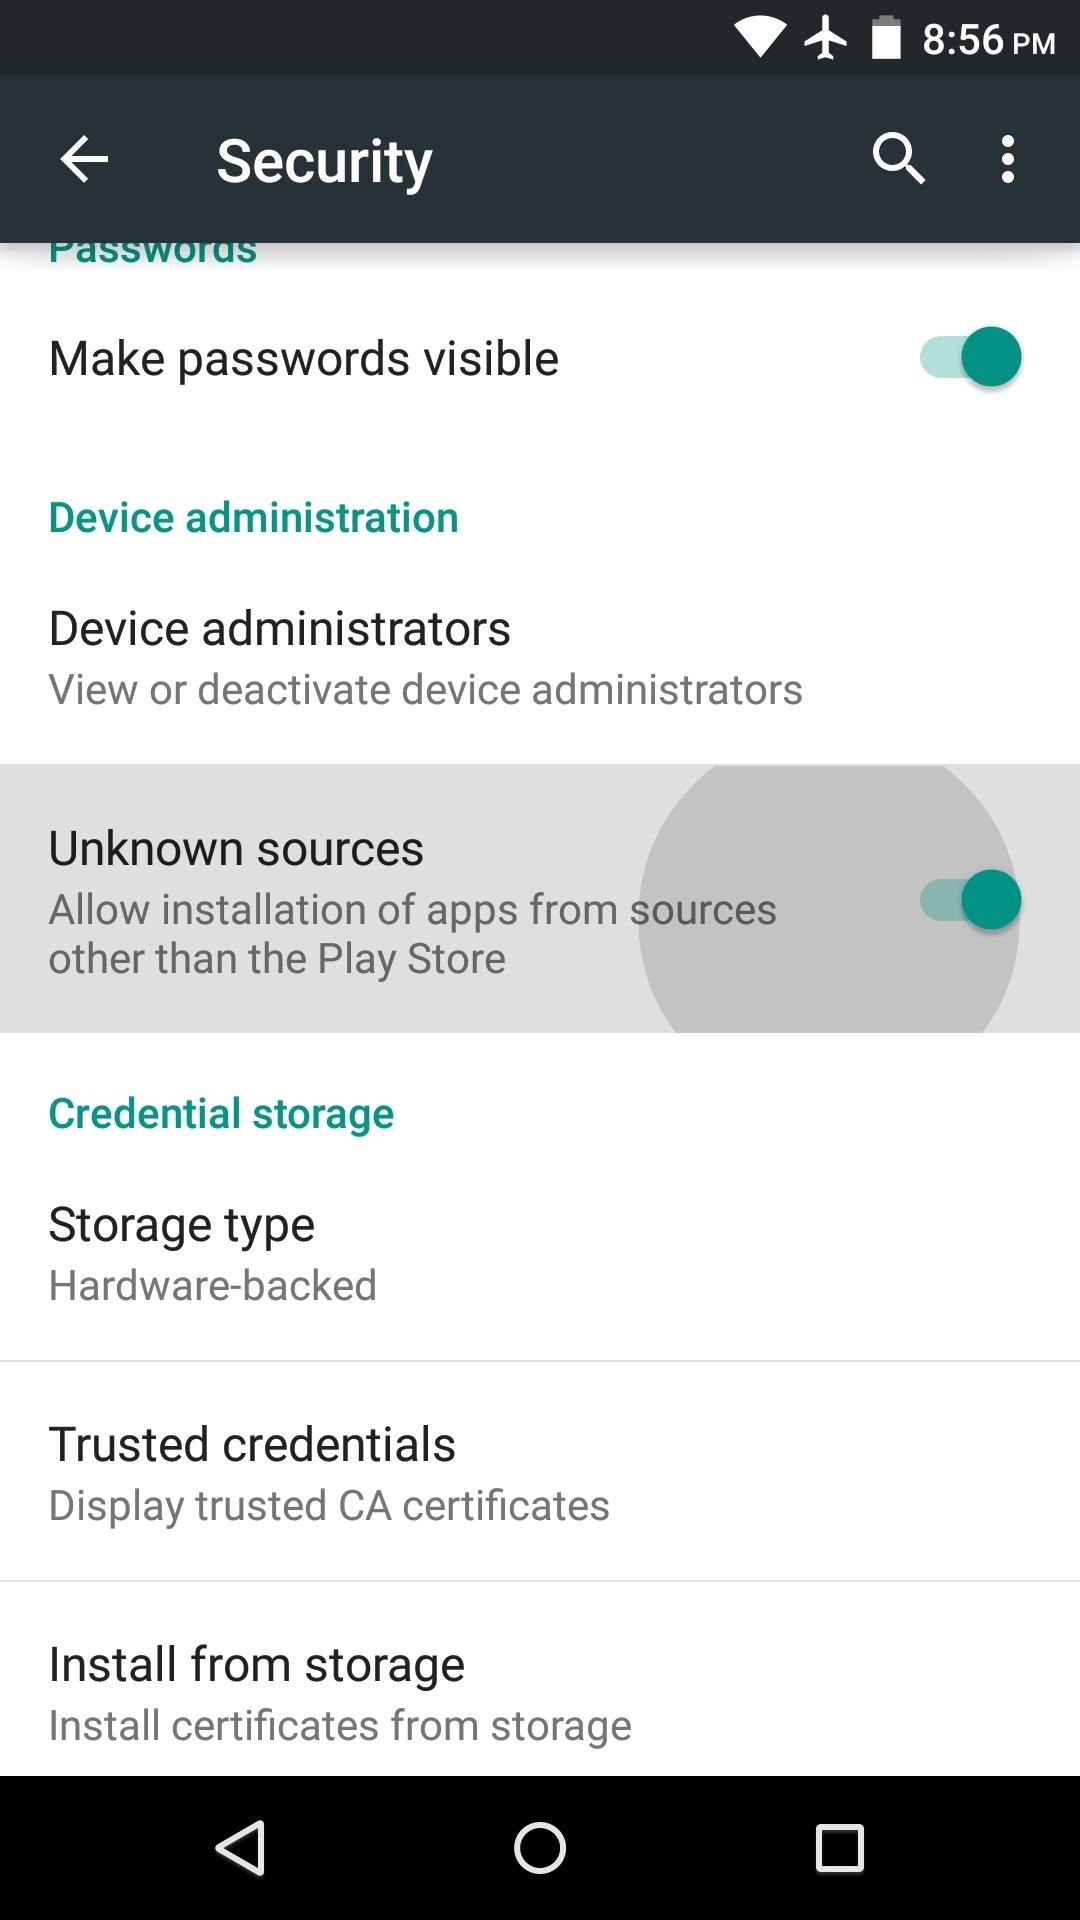 settings>>apps>>allow installation from unknown sources